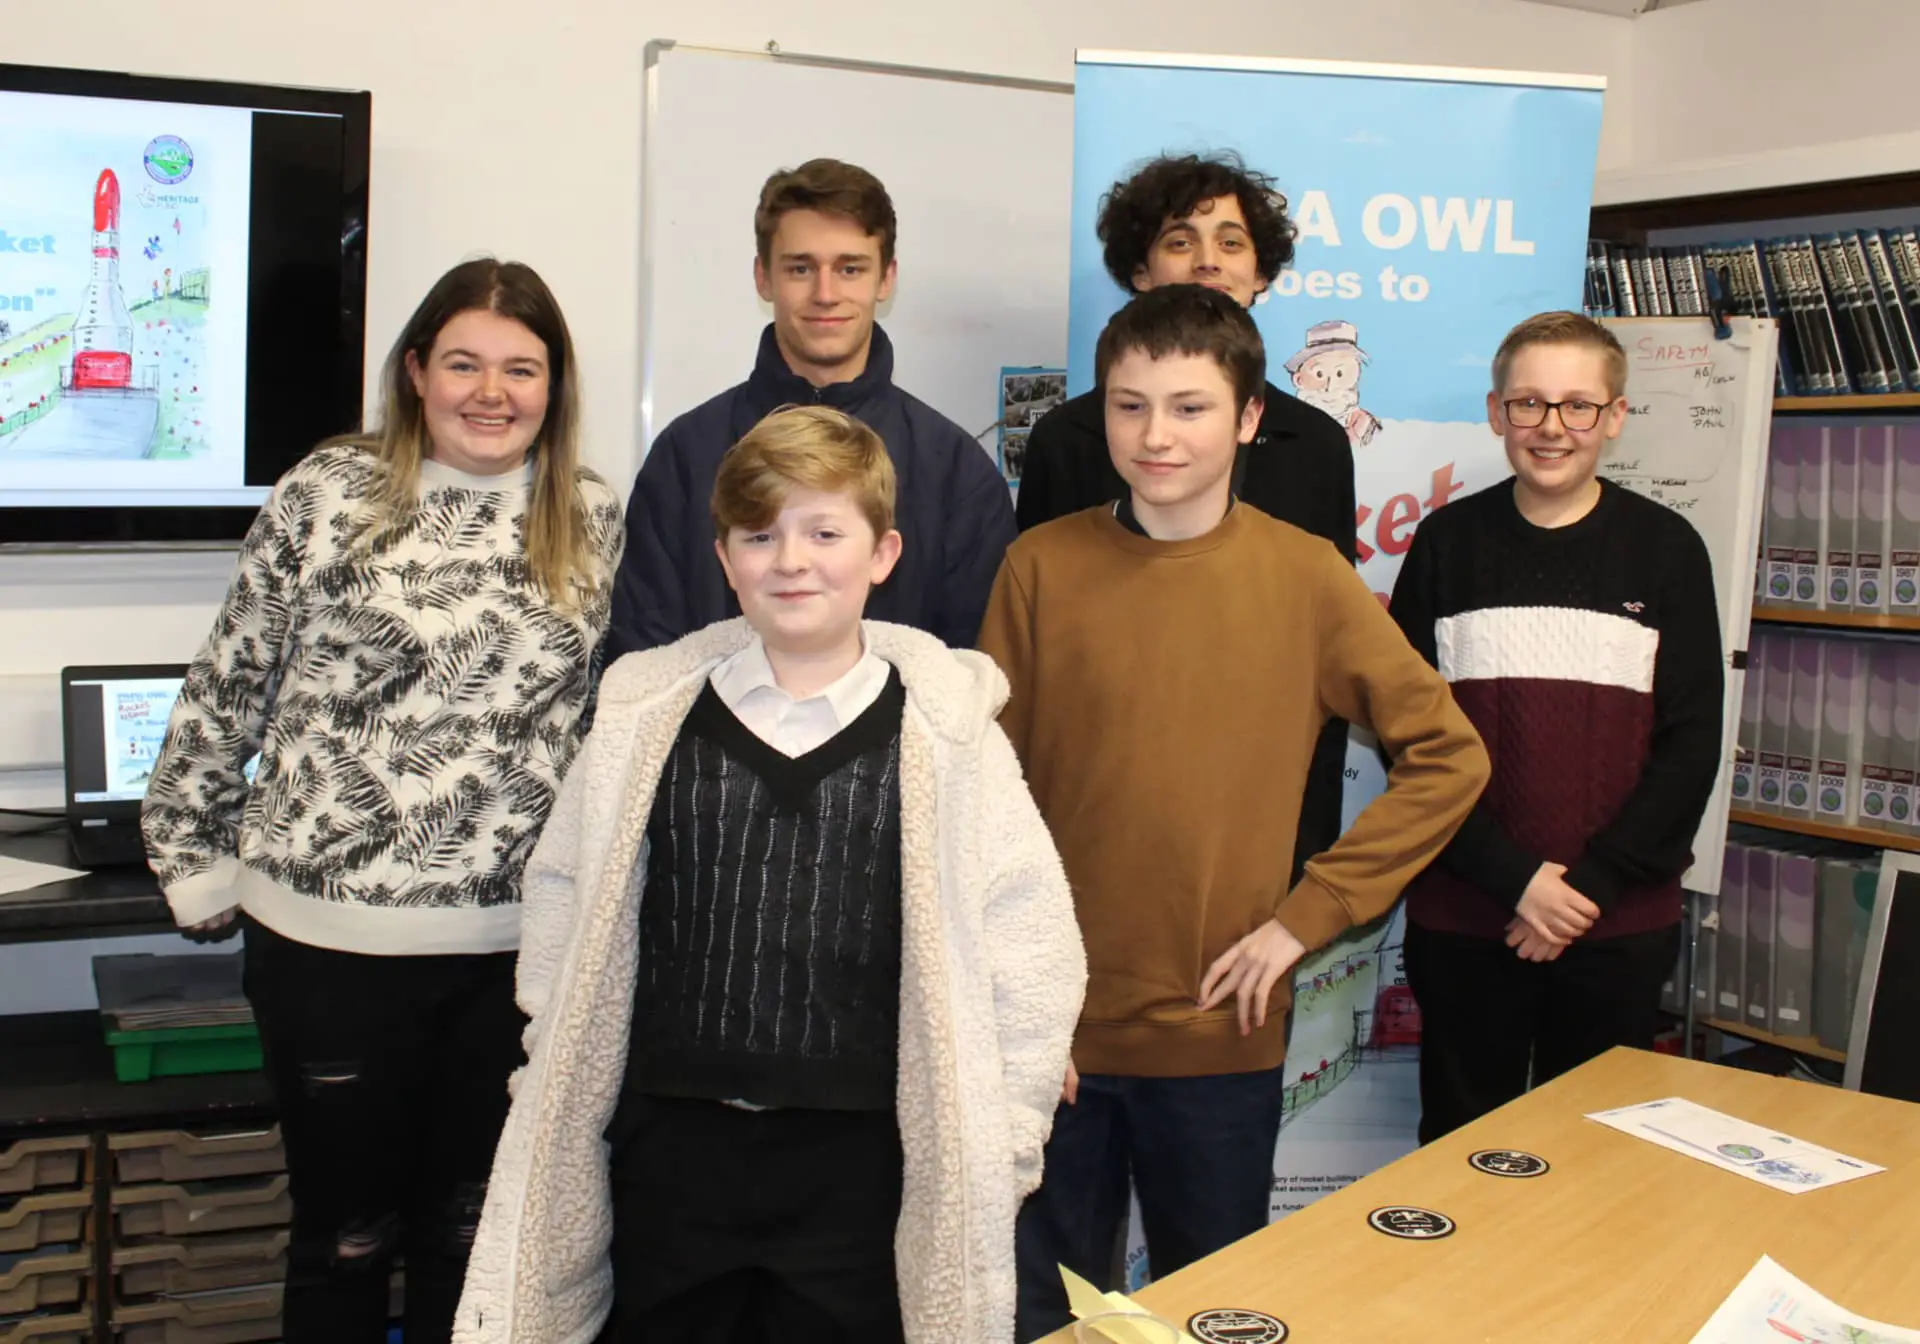 Members of the "Rocket Island Production Team" attending the "Awards Evening" L to R Katie Winchcombe, Freddie Holme (front), Ollie Arnell, Liam Cox (Front), Nathaniel Lowthion Craggs, and Liam Downer